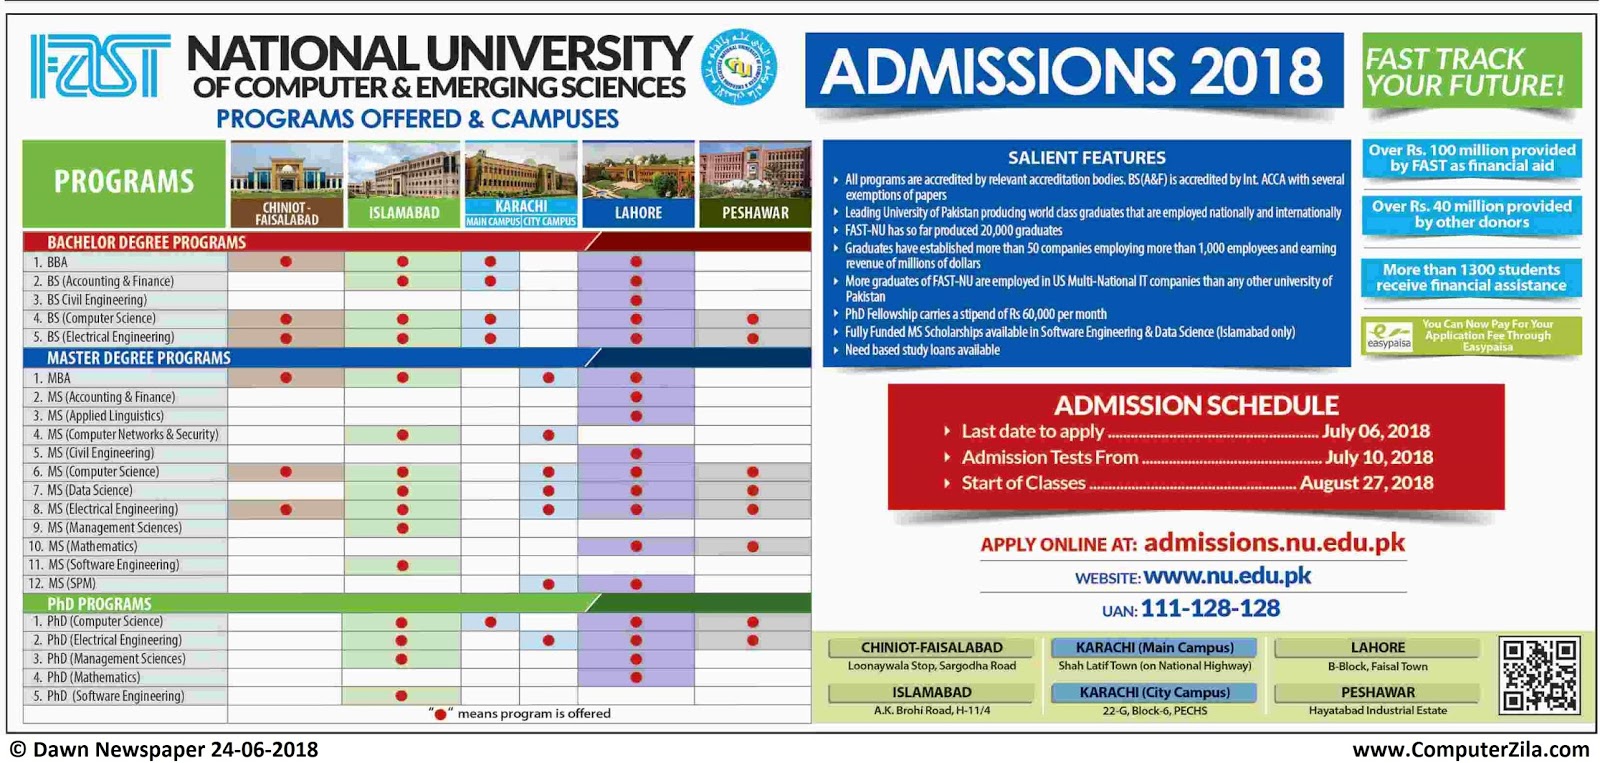 Fast National University Of Computer and Emerging Sciences Admissions Fall 2018